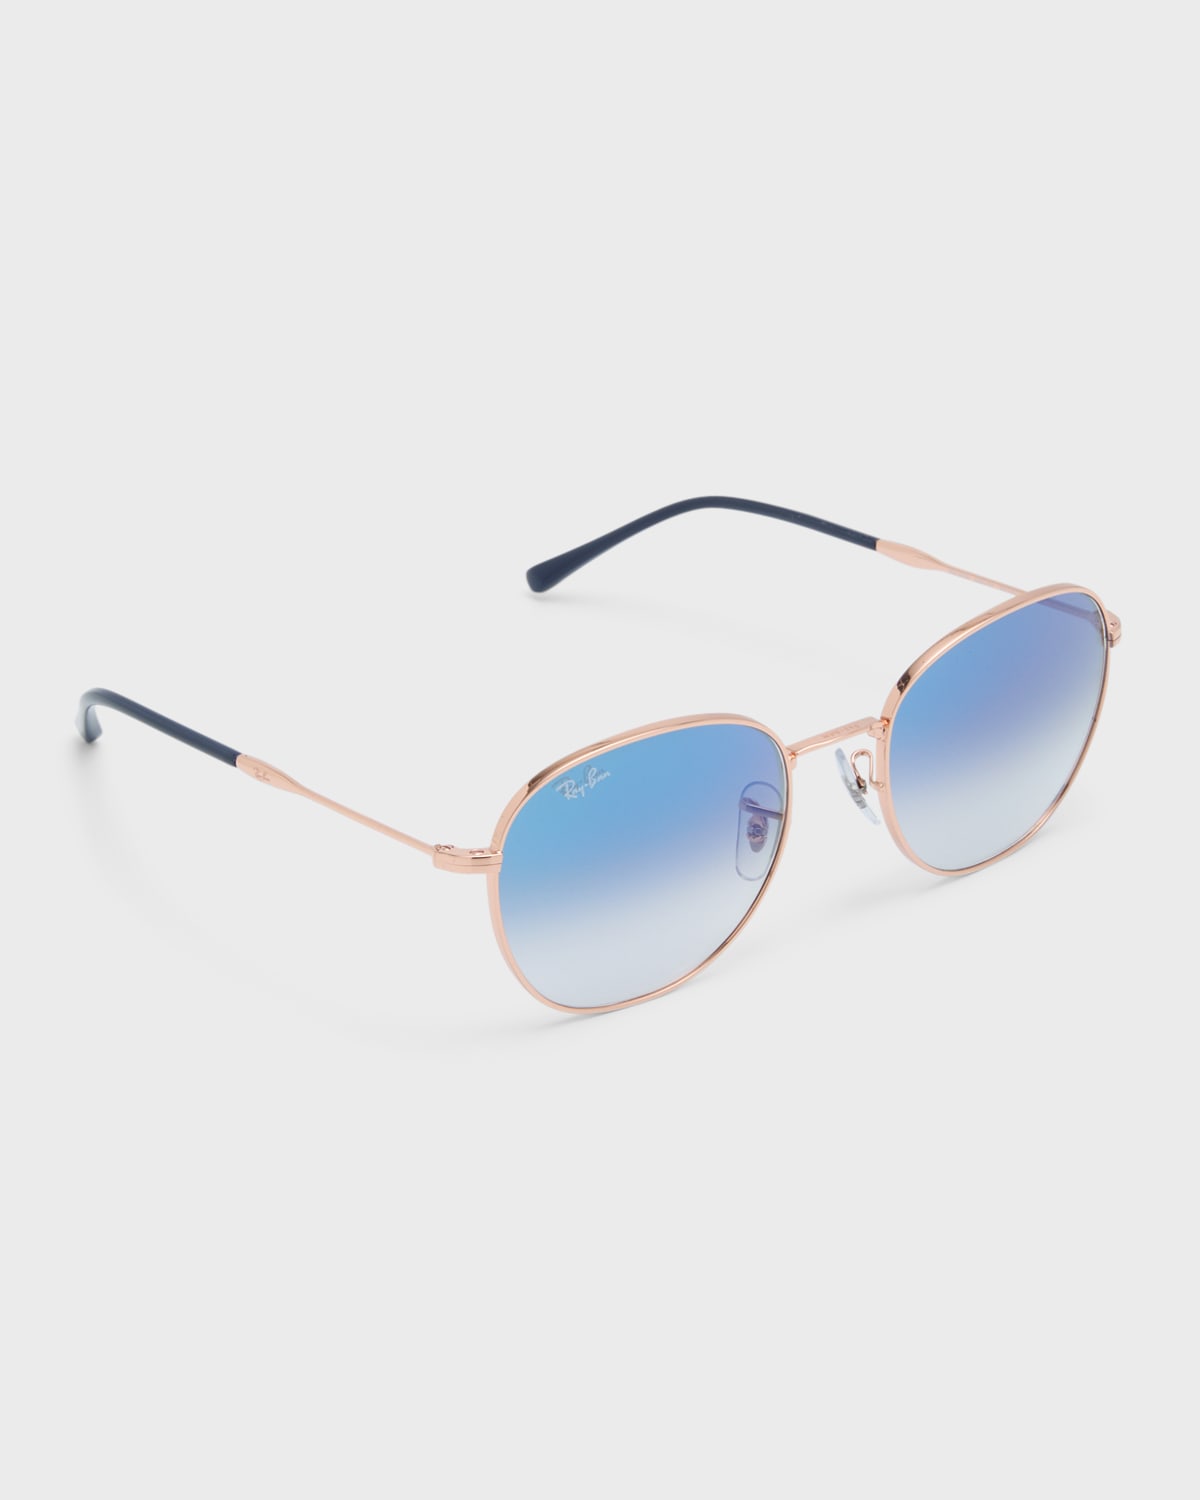 Ray Ban Gradient Metal Round Sunglasses In Rose Gold